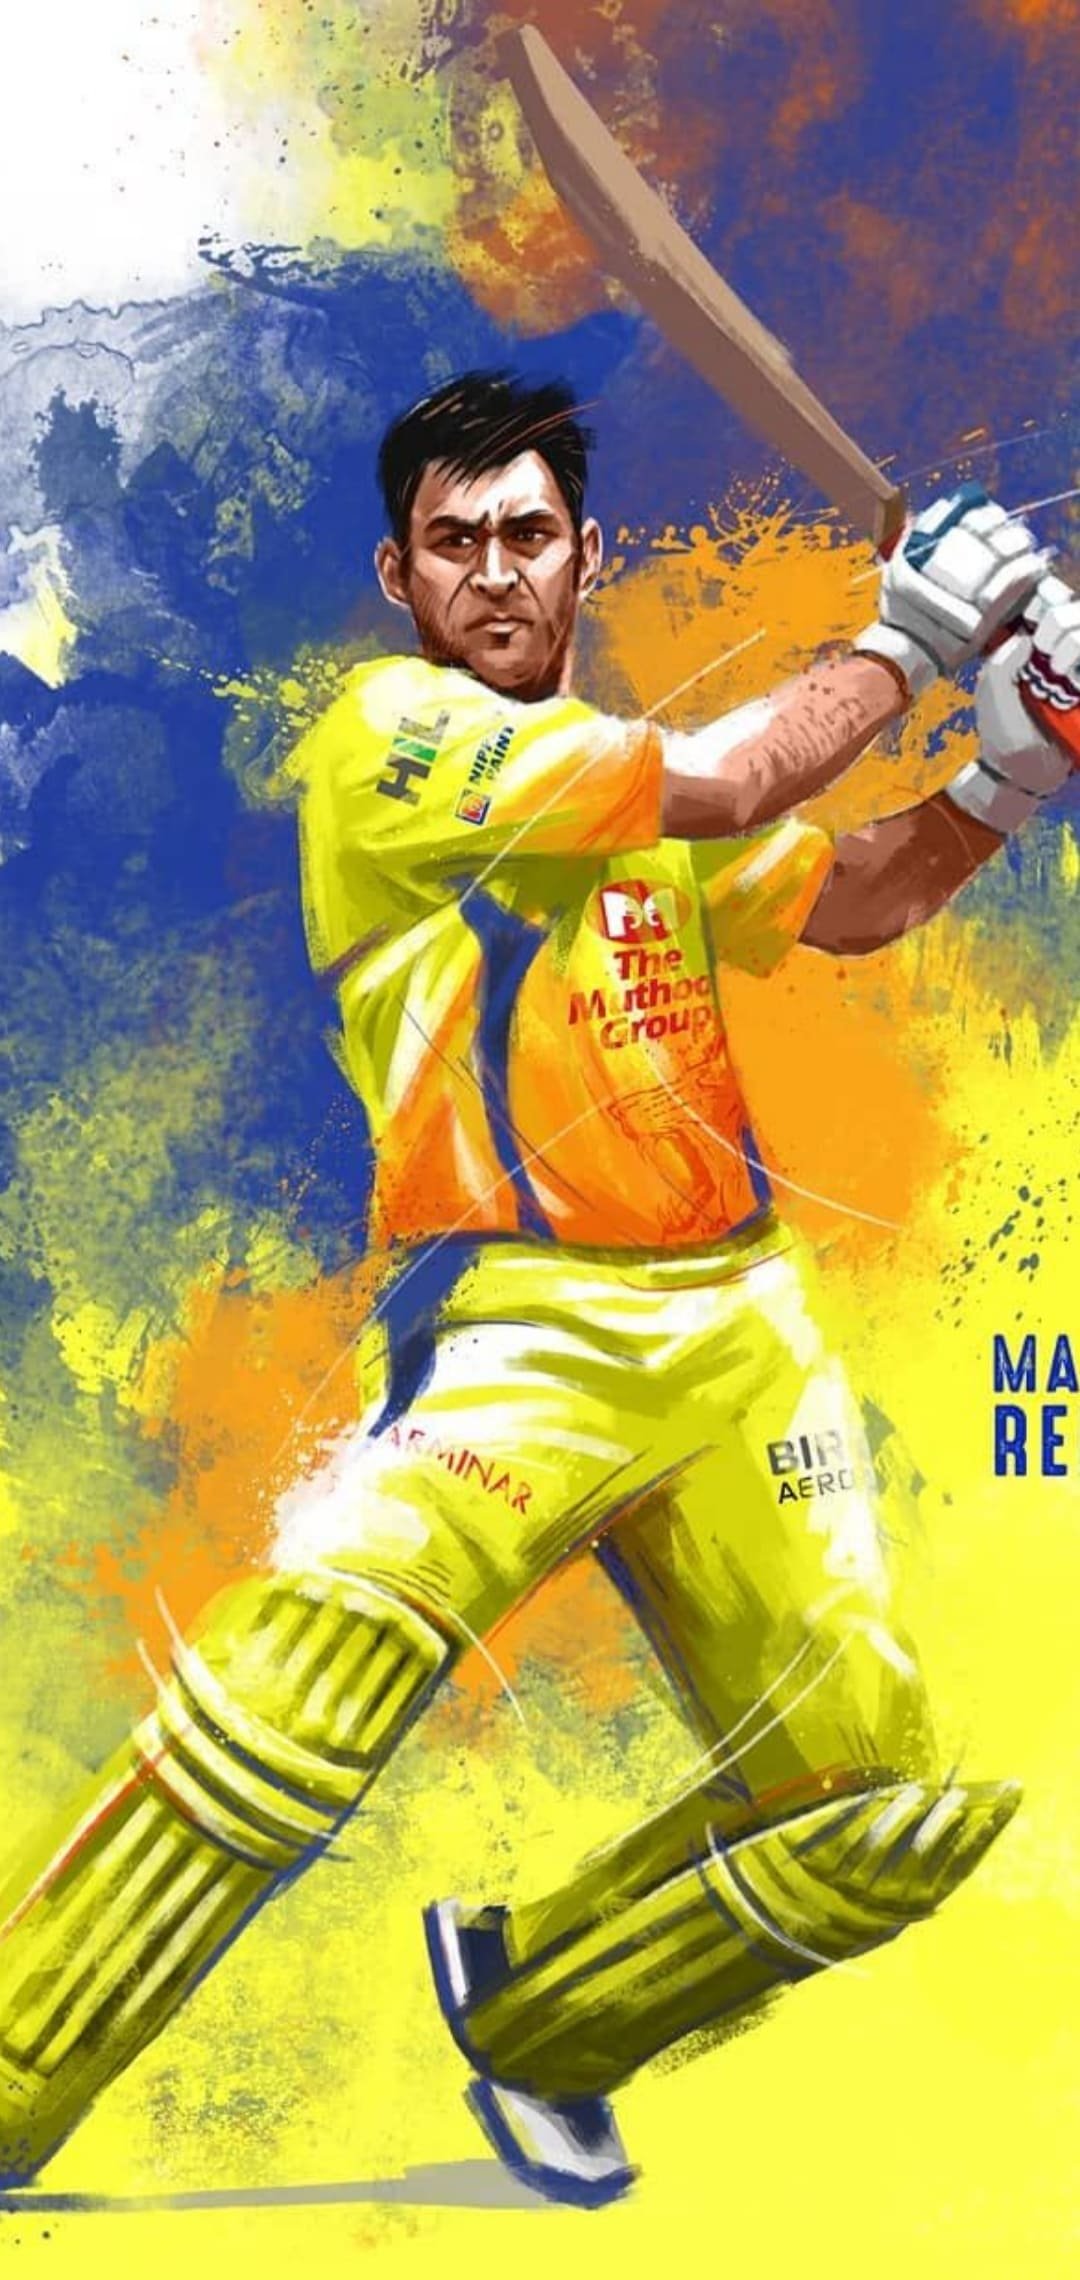 dhoni images in csk download